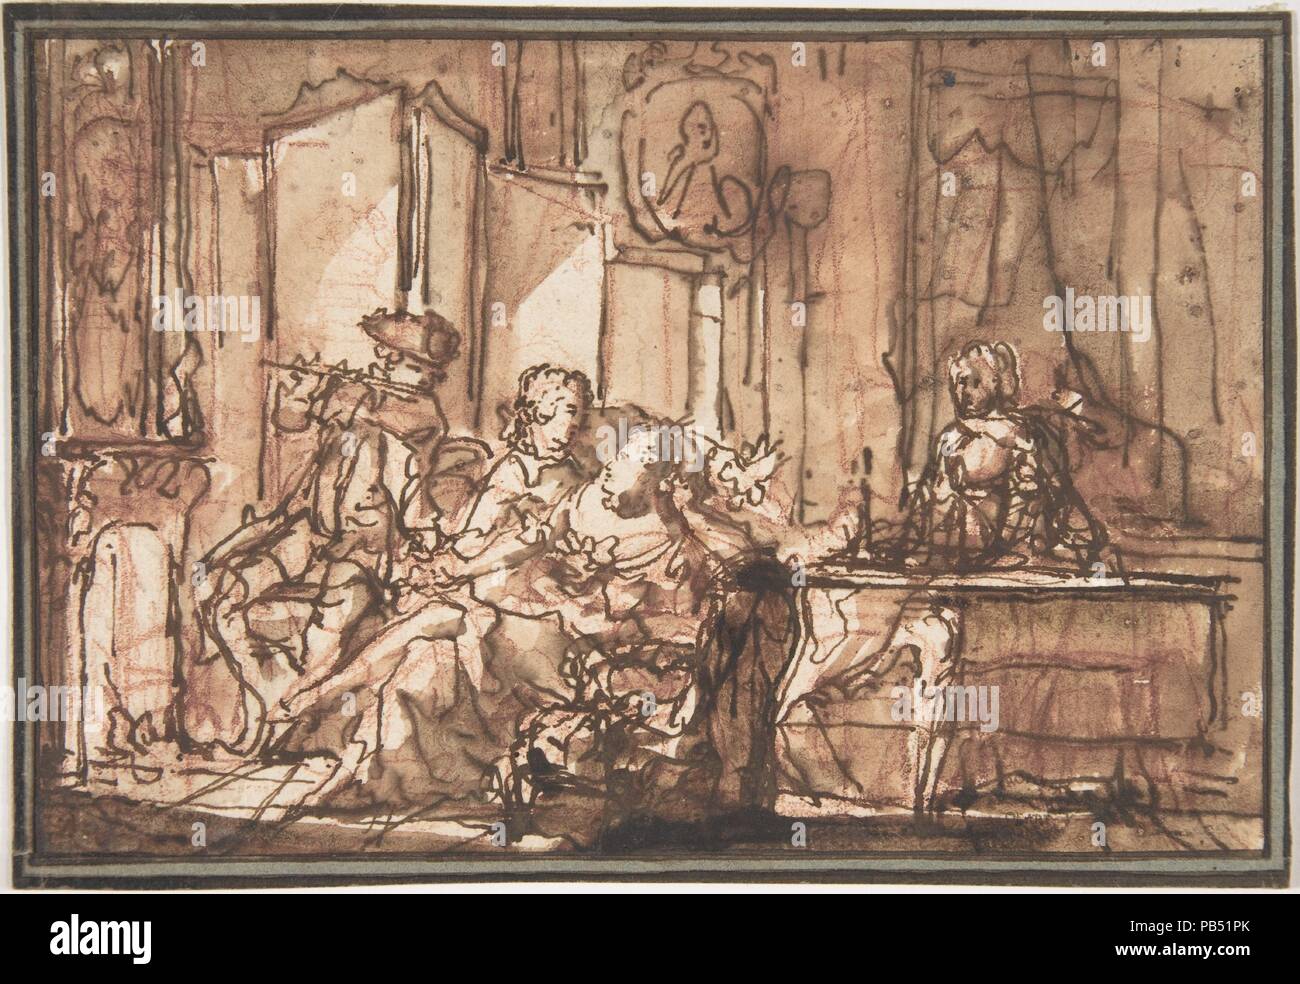 Interior with Figures. Artist: Anonymous, French, 18th century. Dimensions: 4 3/8 x 6 9/16 in.  (11.1 x 16.6 cm). Date: 18th century. Museum: Metropolitan Museum of Art, New York, USA. Stock Photo